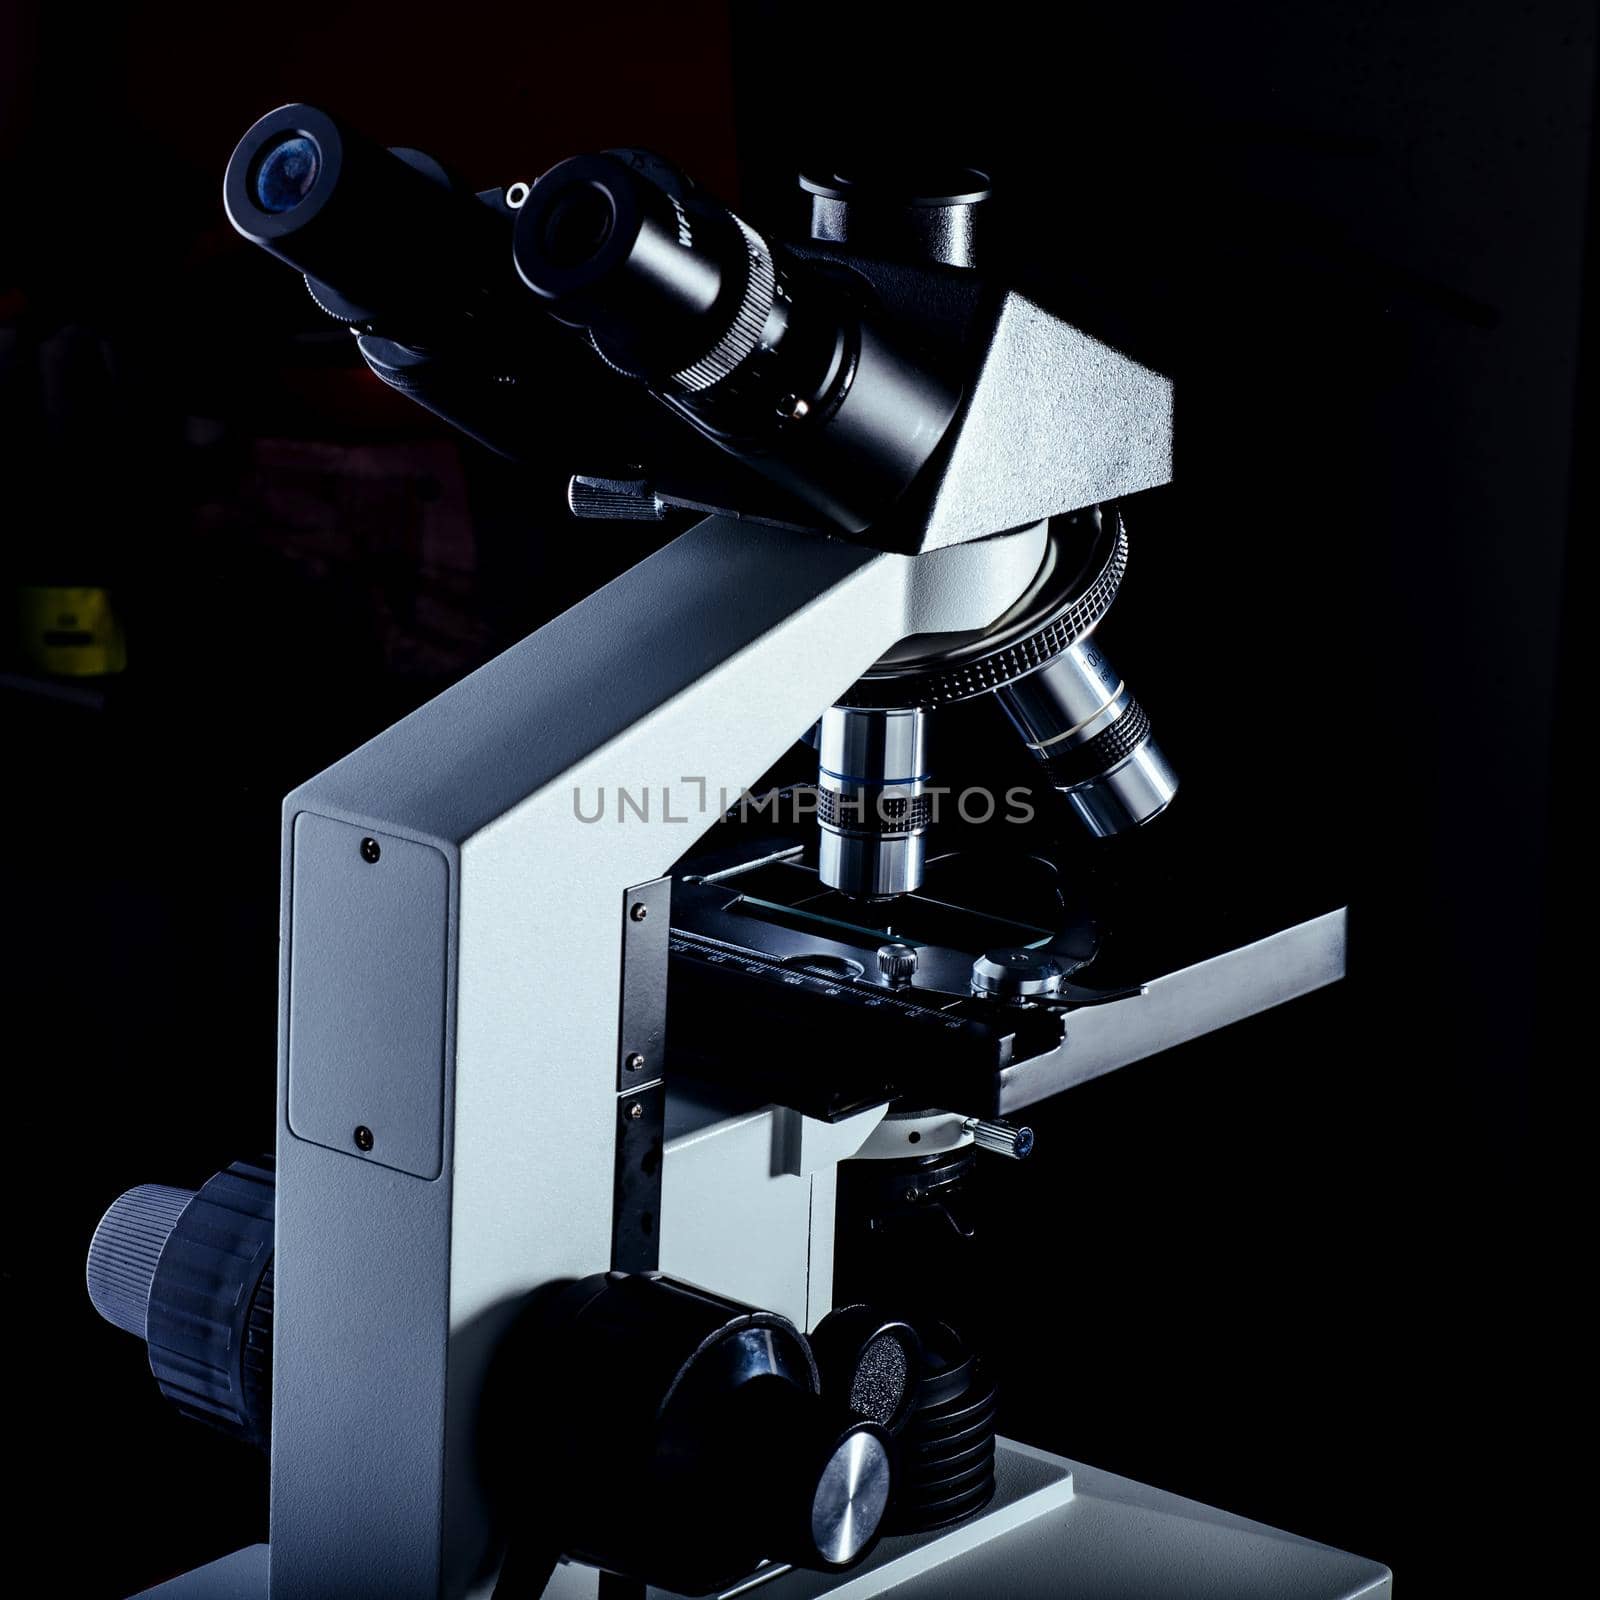 Close up of microscope at the laboratory